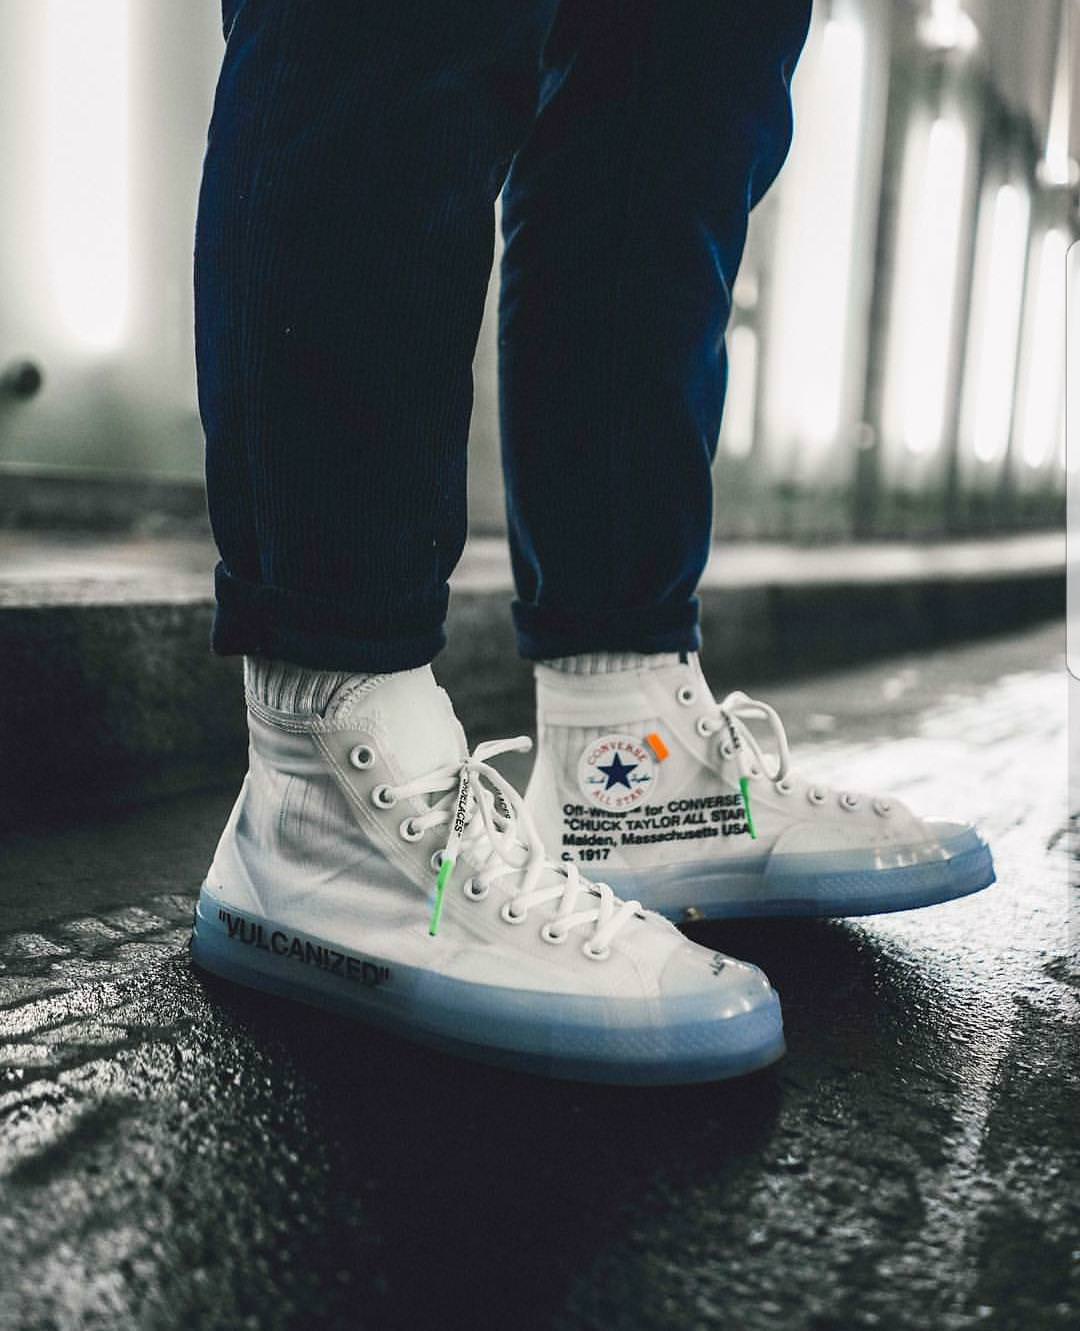 Off-White x Converse Chuck All in a new guise | City Magazine